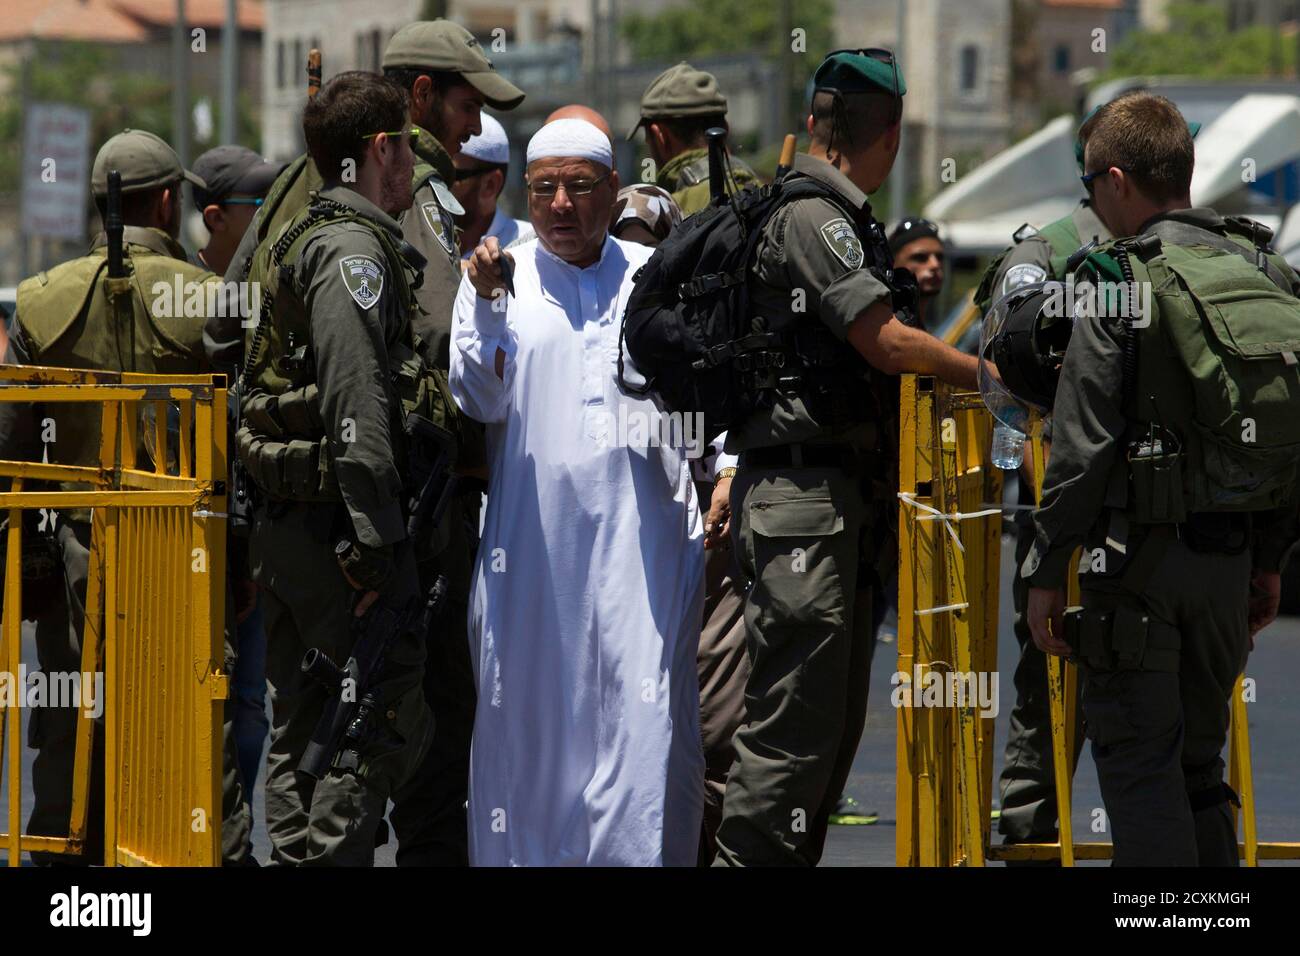 A man walks past a checkpoint manned by Israeli police after showing his identity card, on the last Friday of the holy month of Ramadan close to the Damascus Gate of the Old City in Jerusalem July 25, 2014. REUTERS/Siegfried Modola (JERUSALEM - Tags: RELIGION) Stock Photo